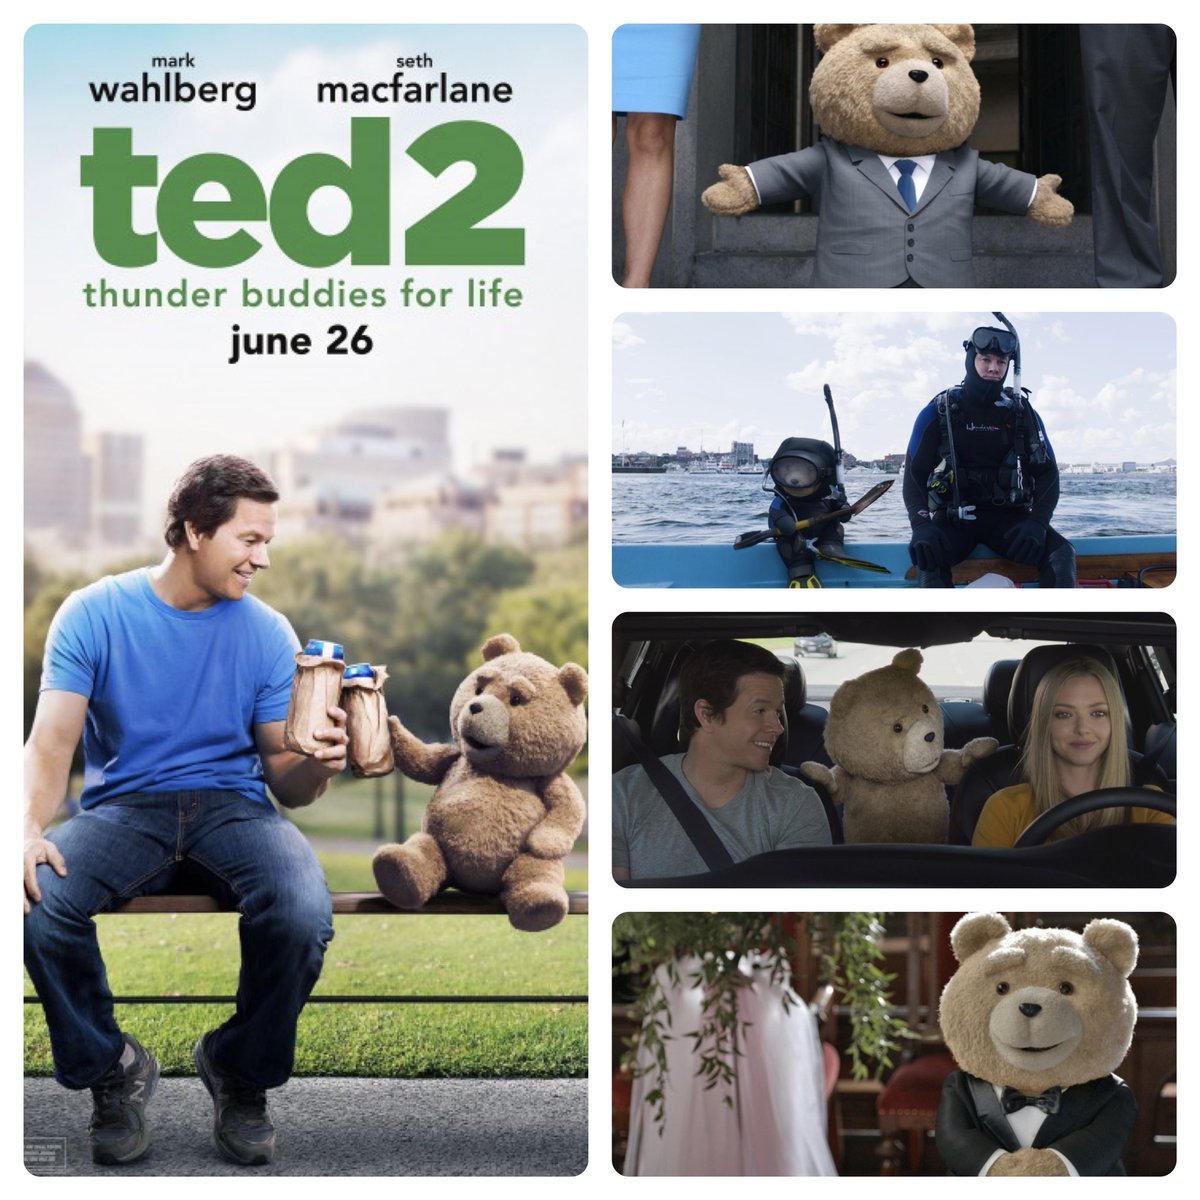 Ted 2 celebrates 8th anniversary today.
#ted2 #ted2015 #markwahlberg #markwahlbergfans #markwahlbergmovies #sethmcfarlane #amandaseyfried #amandaseyfriedmovies #morganfreeman #morganfreemanfans  #morganfreemanmovies #universal #universalstudios #universalpictures #comedymovies